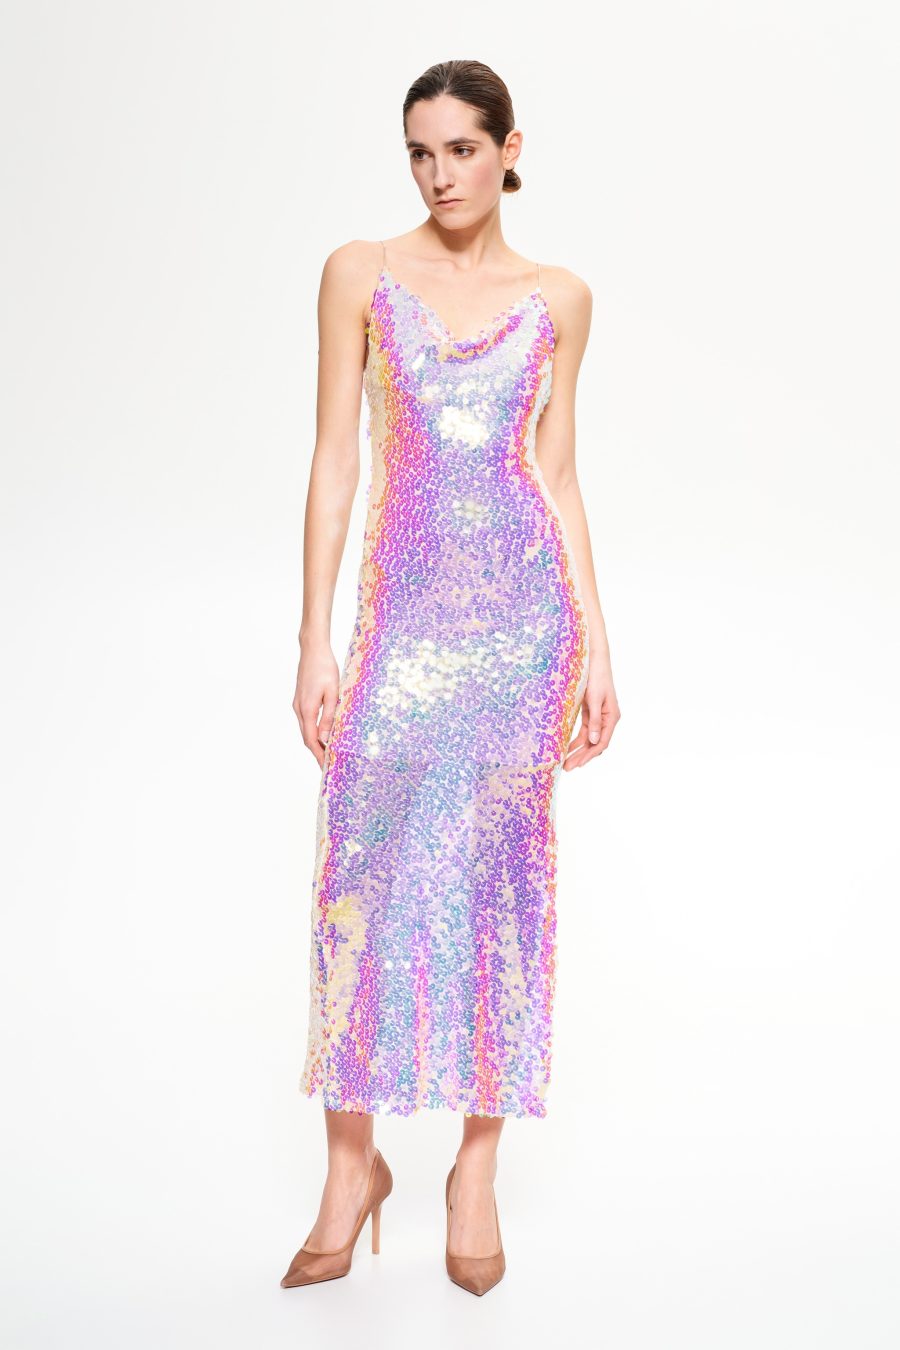 dress-with-sequins (4)